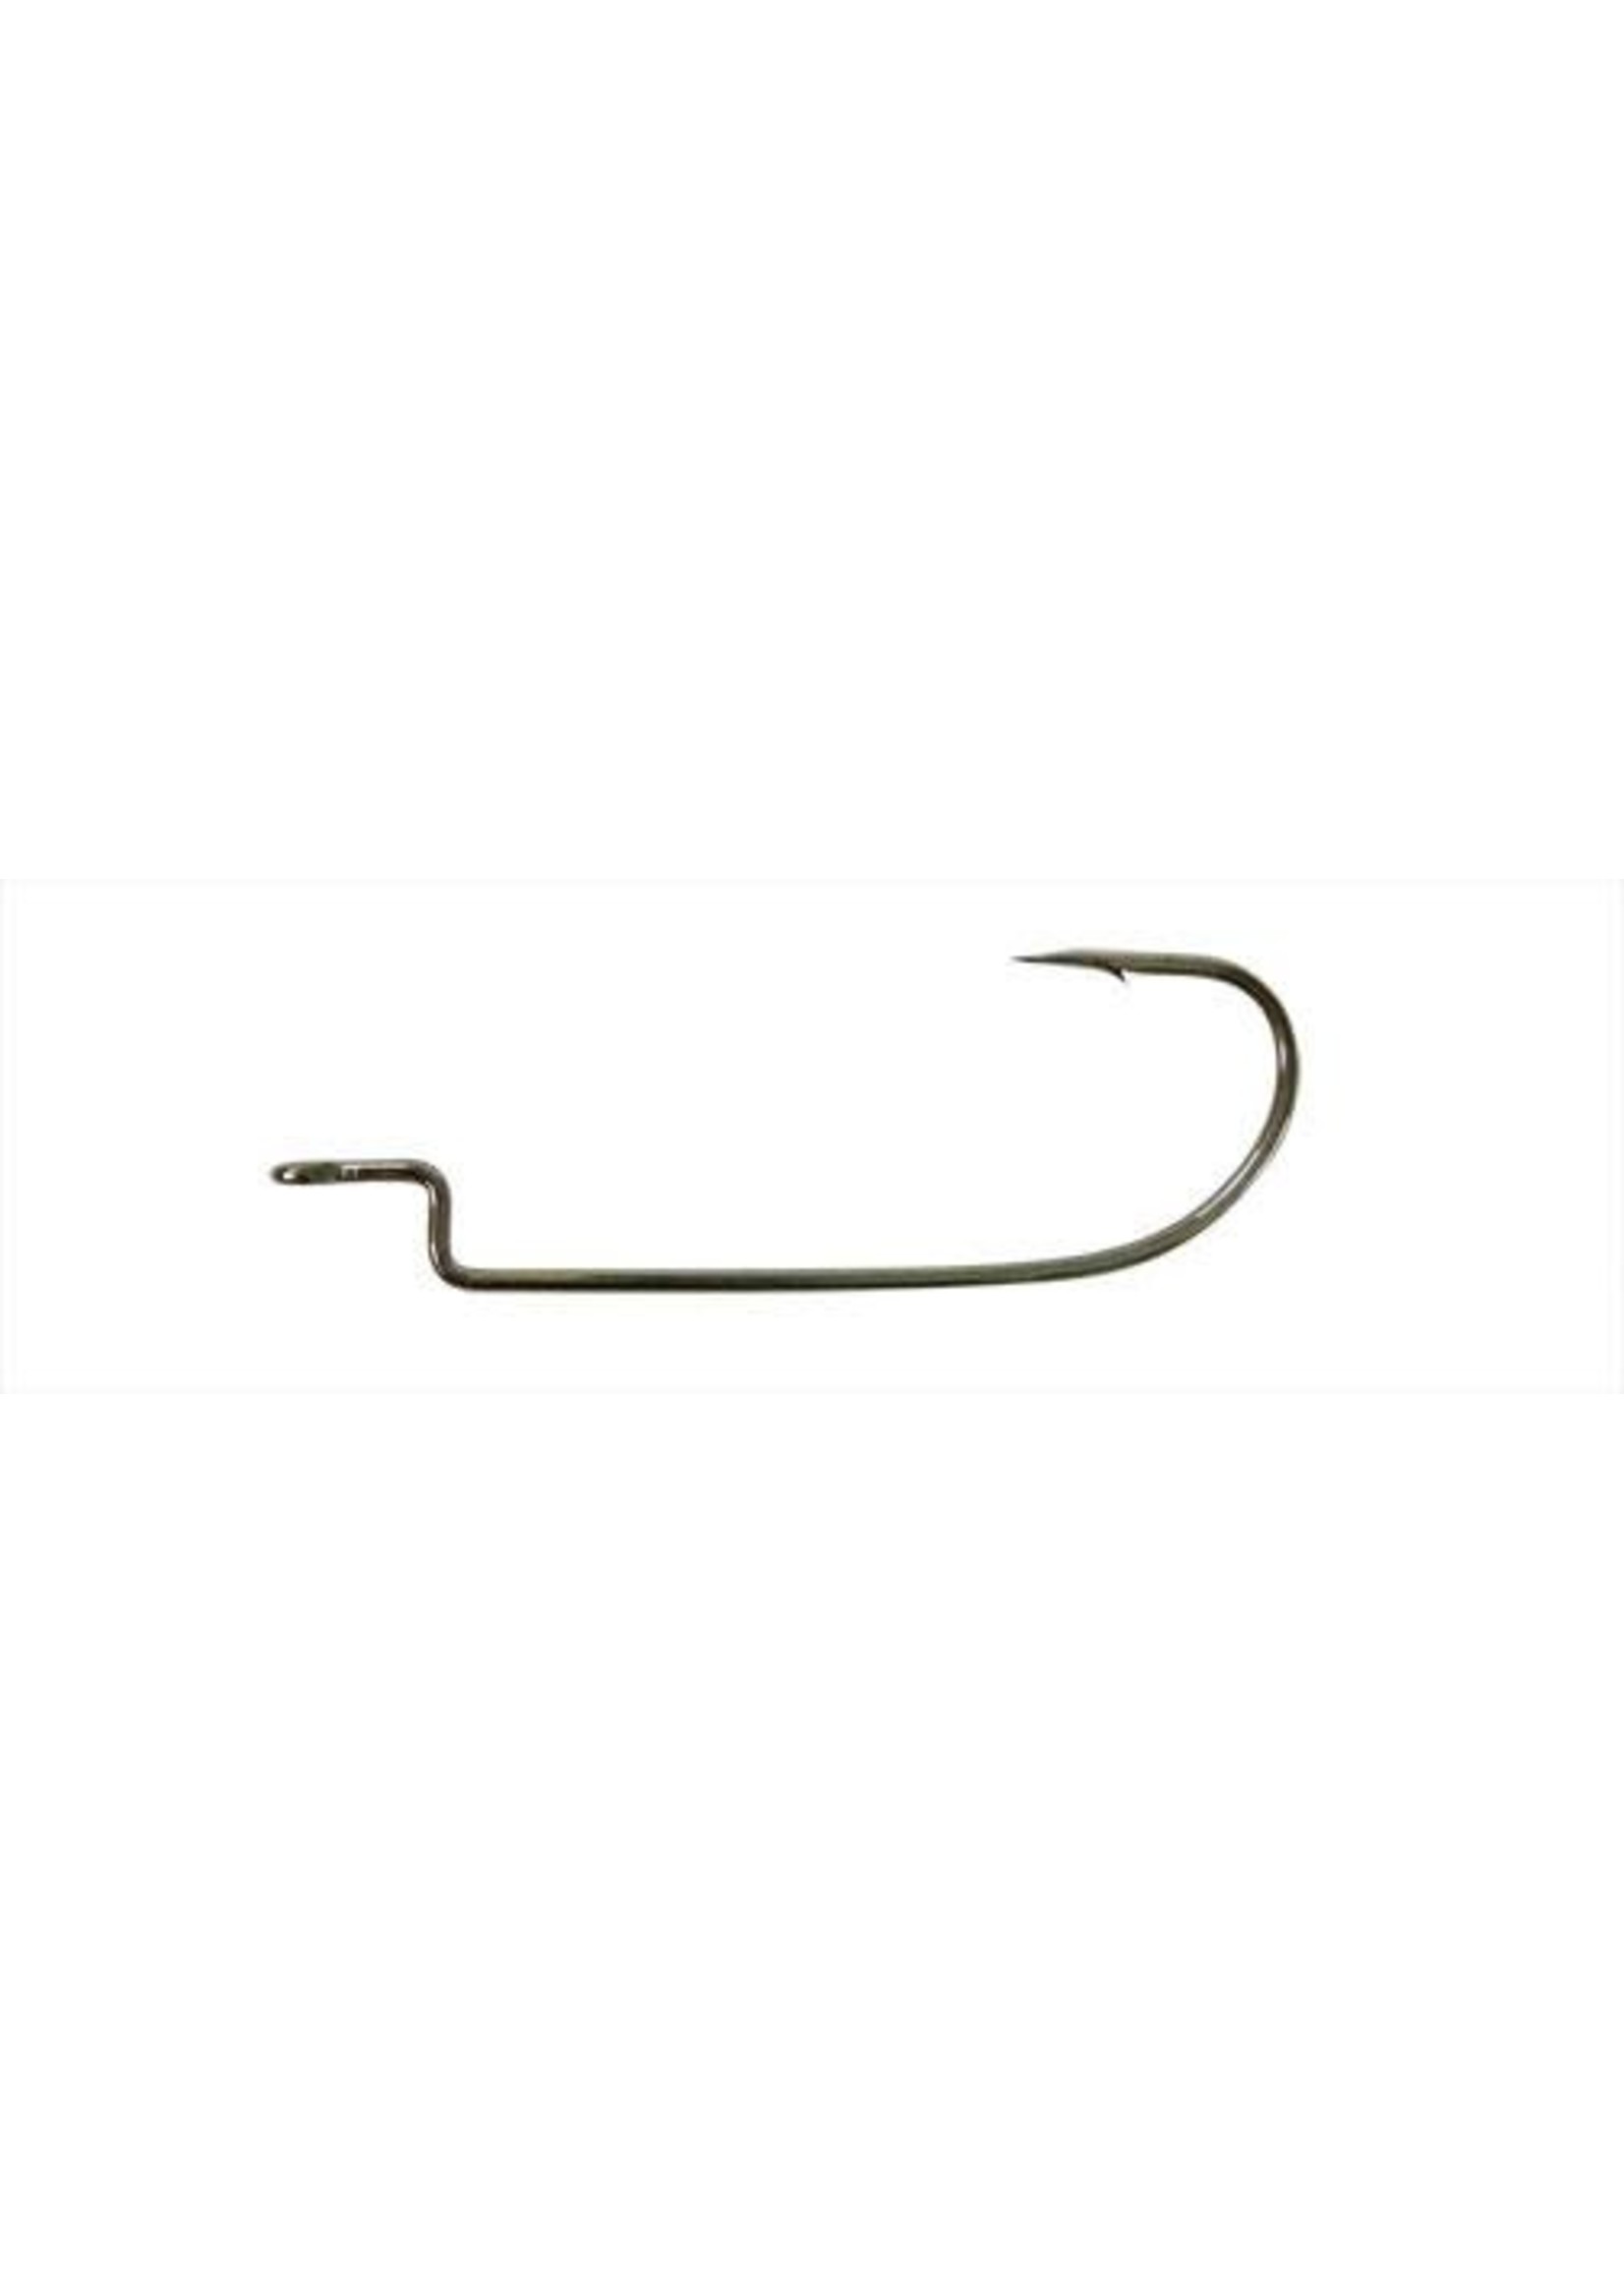 OWNER OWNER OFFSET WORM HOOK - Rugged Shoal Outfitters